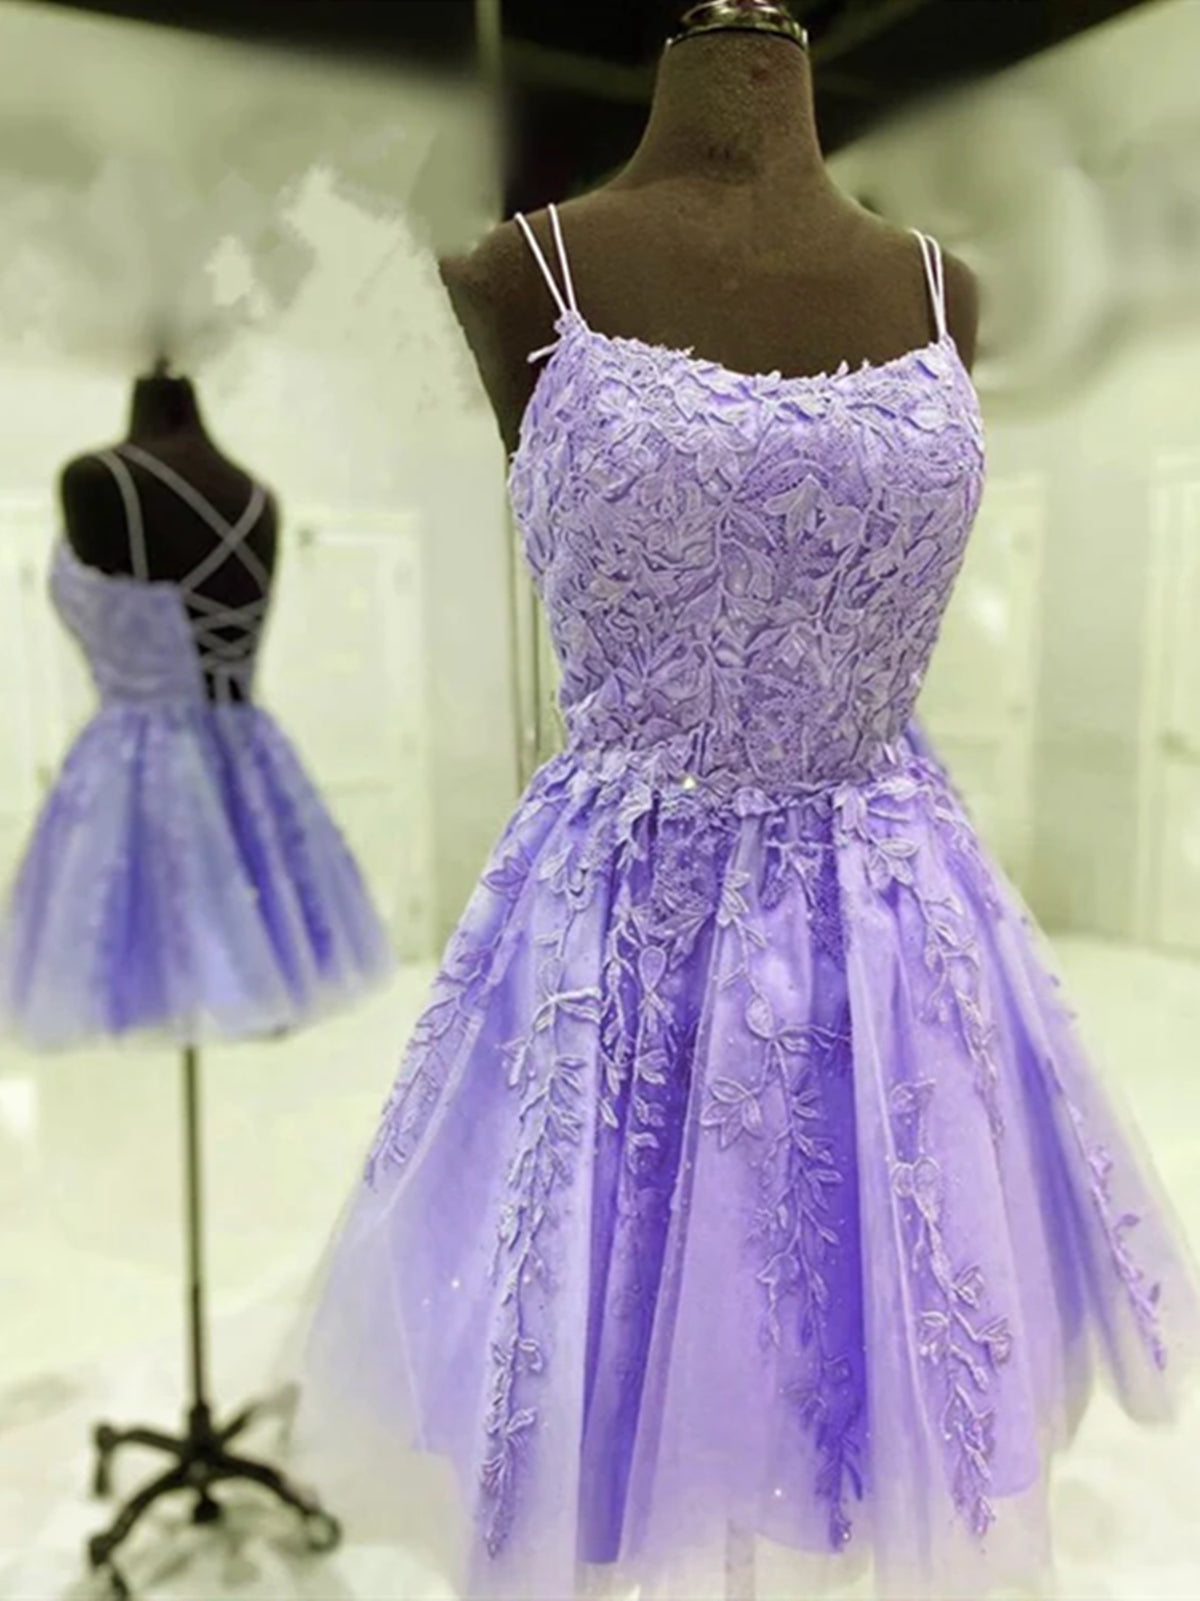 Short Backless Lace Prom Dresses For Black girls For Women, Short Backless Purple Lace Formal Homecoming Dresses